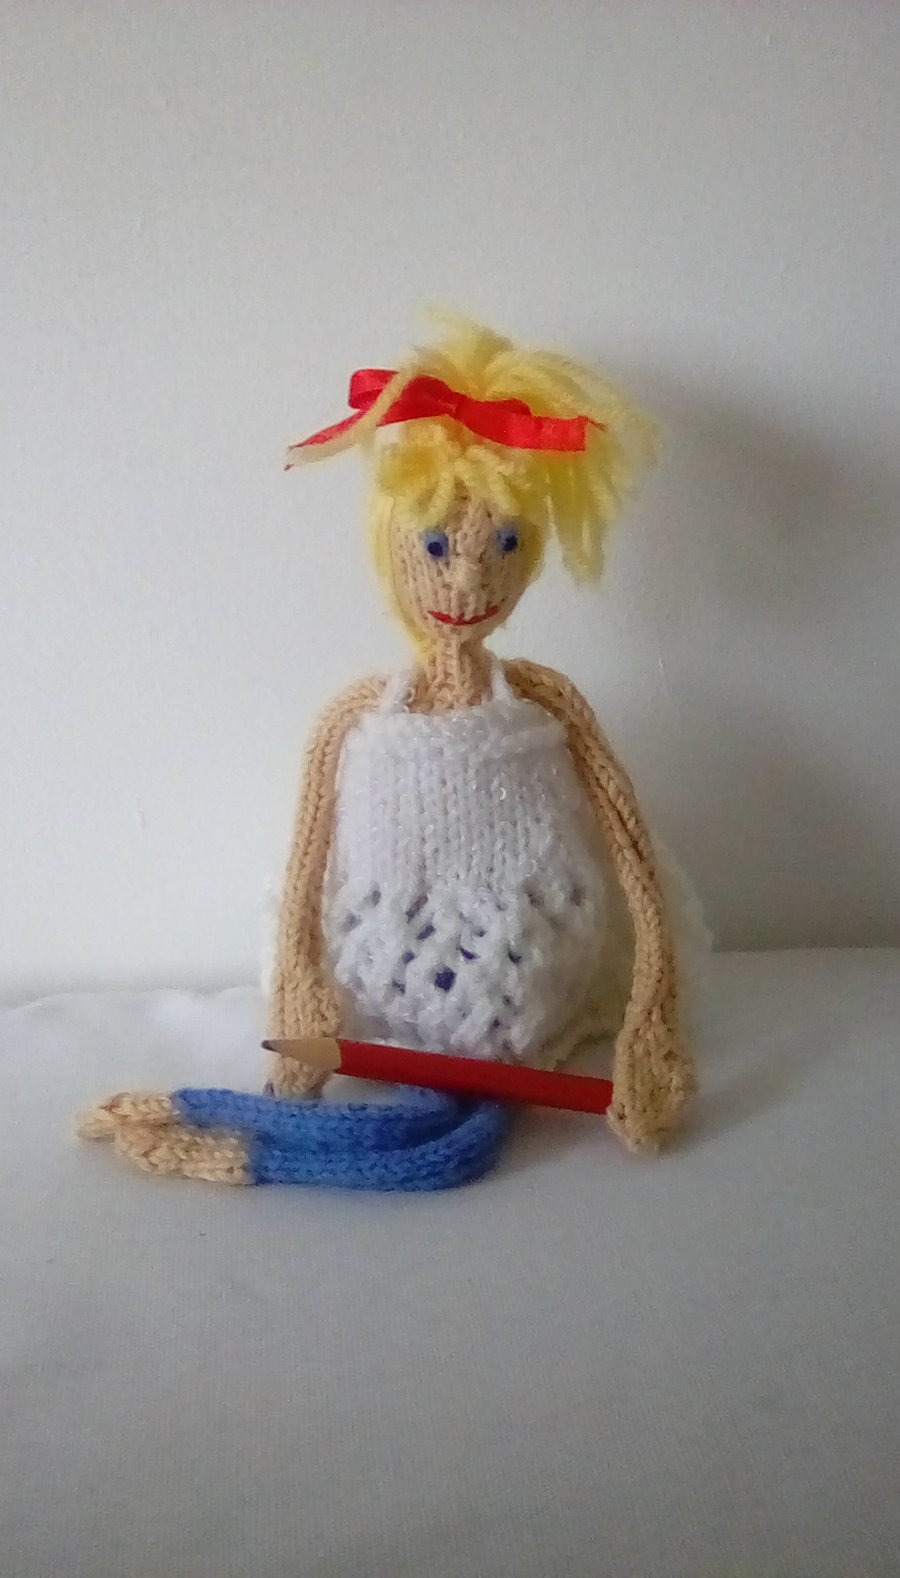 Knitted Doll, Desk decor, home decor, worry doll. Free postage